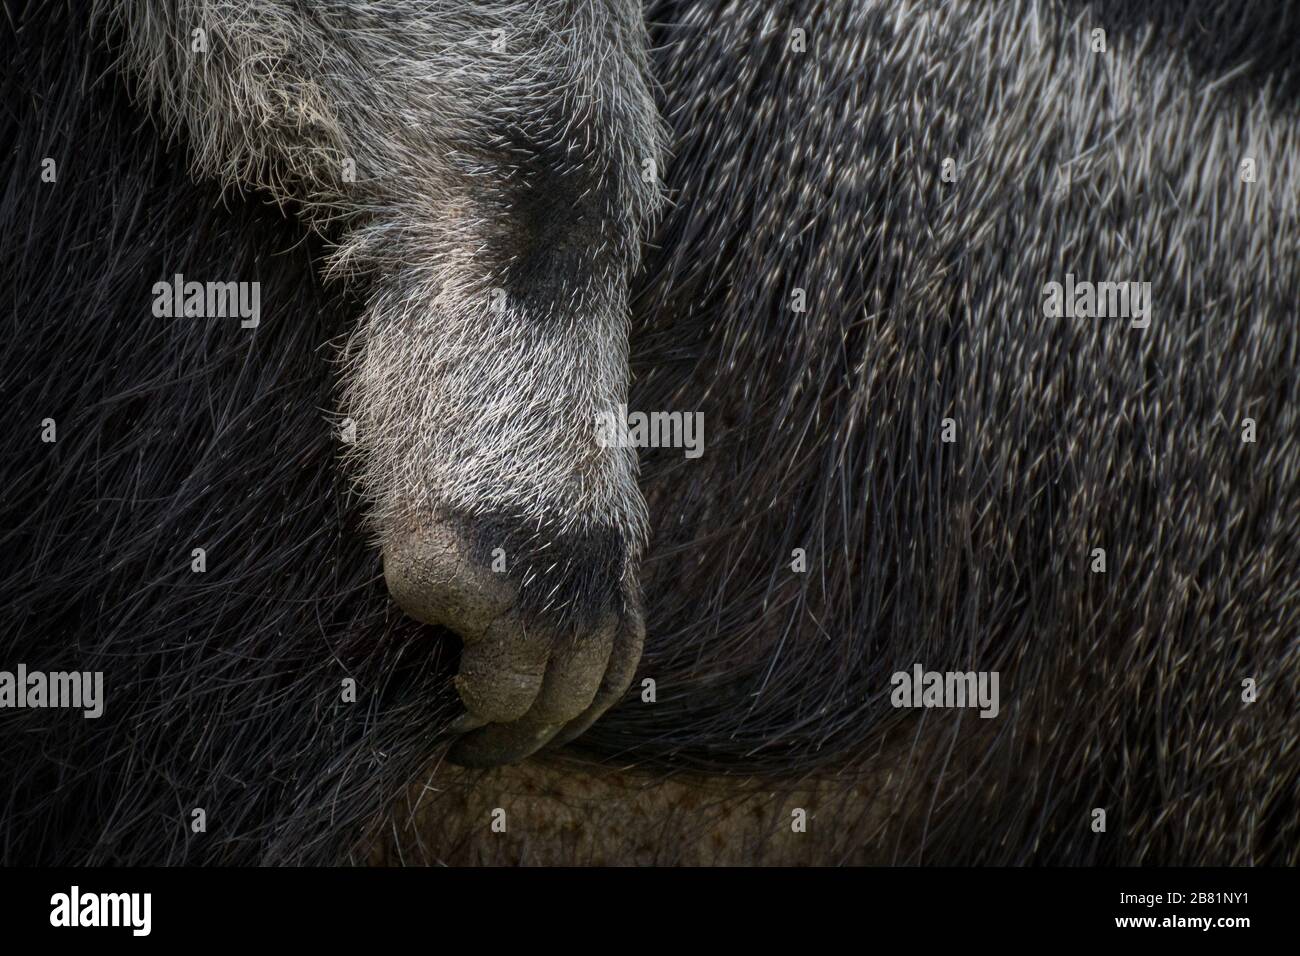 Detail of the paws of a young baby giant anteater Stock Photo